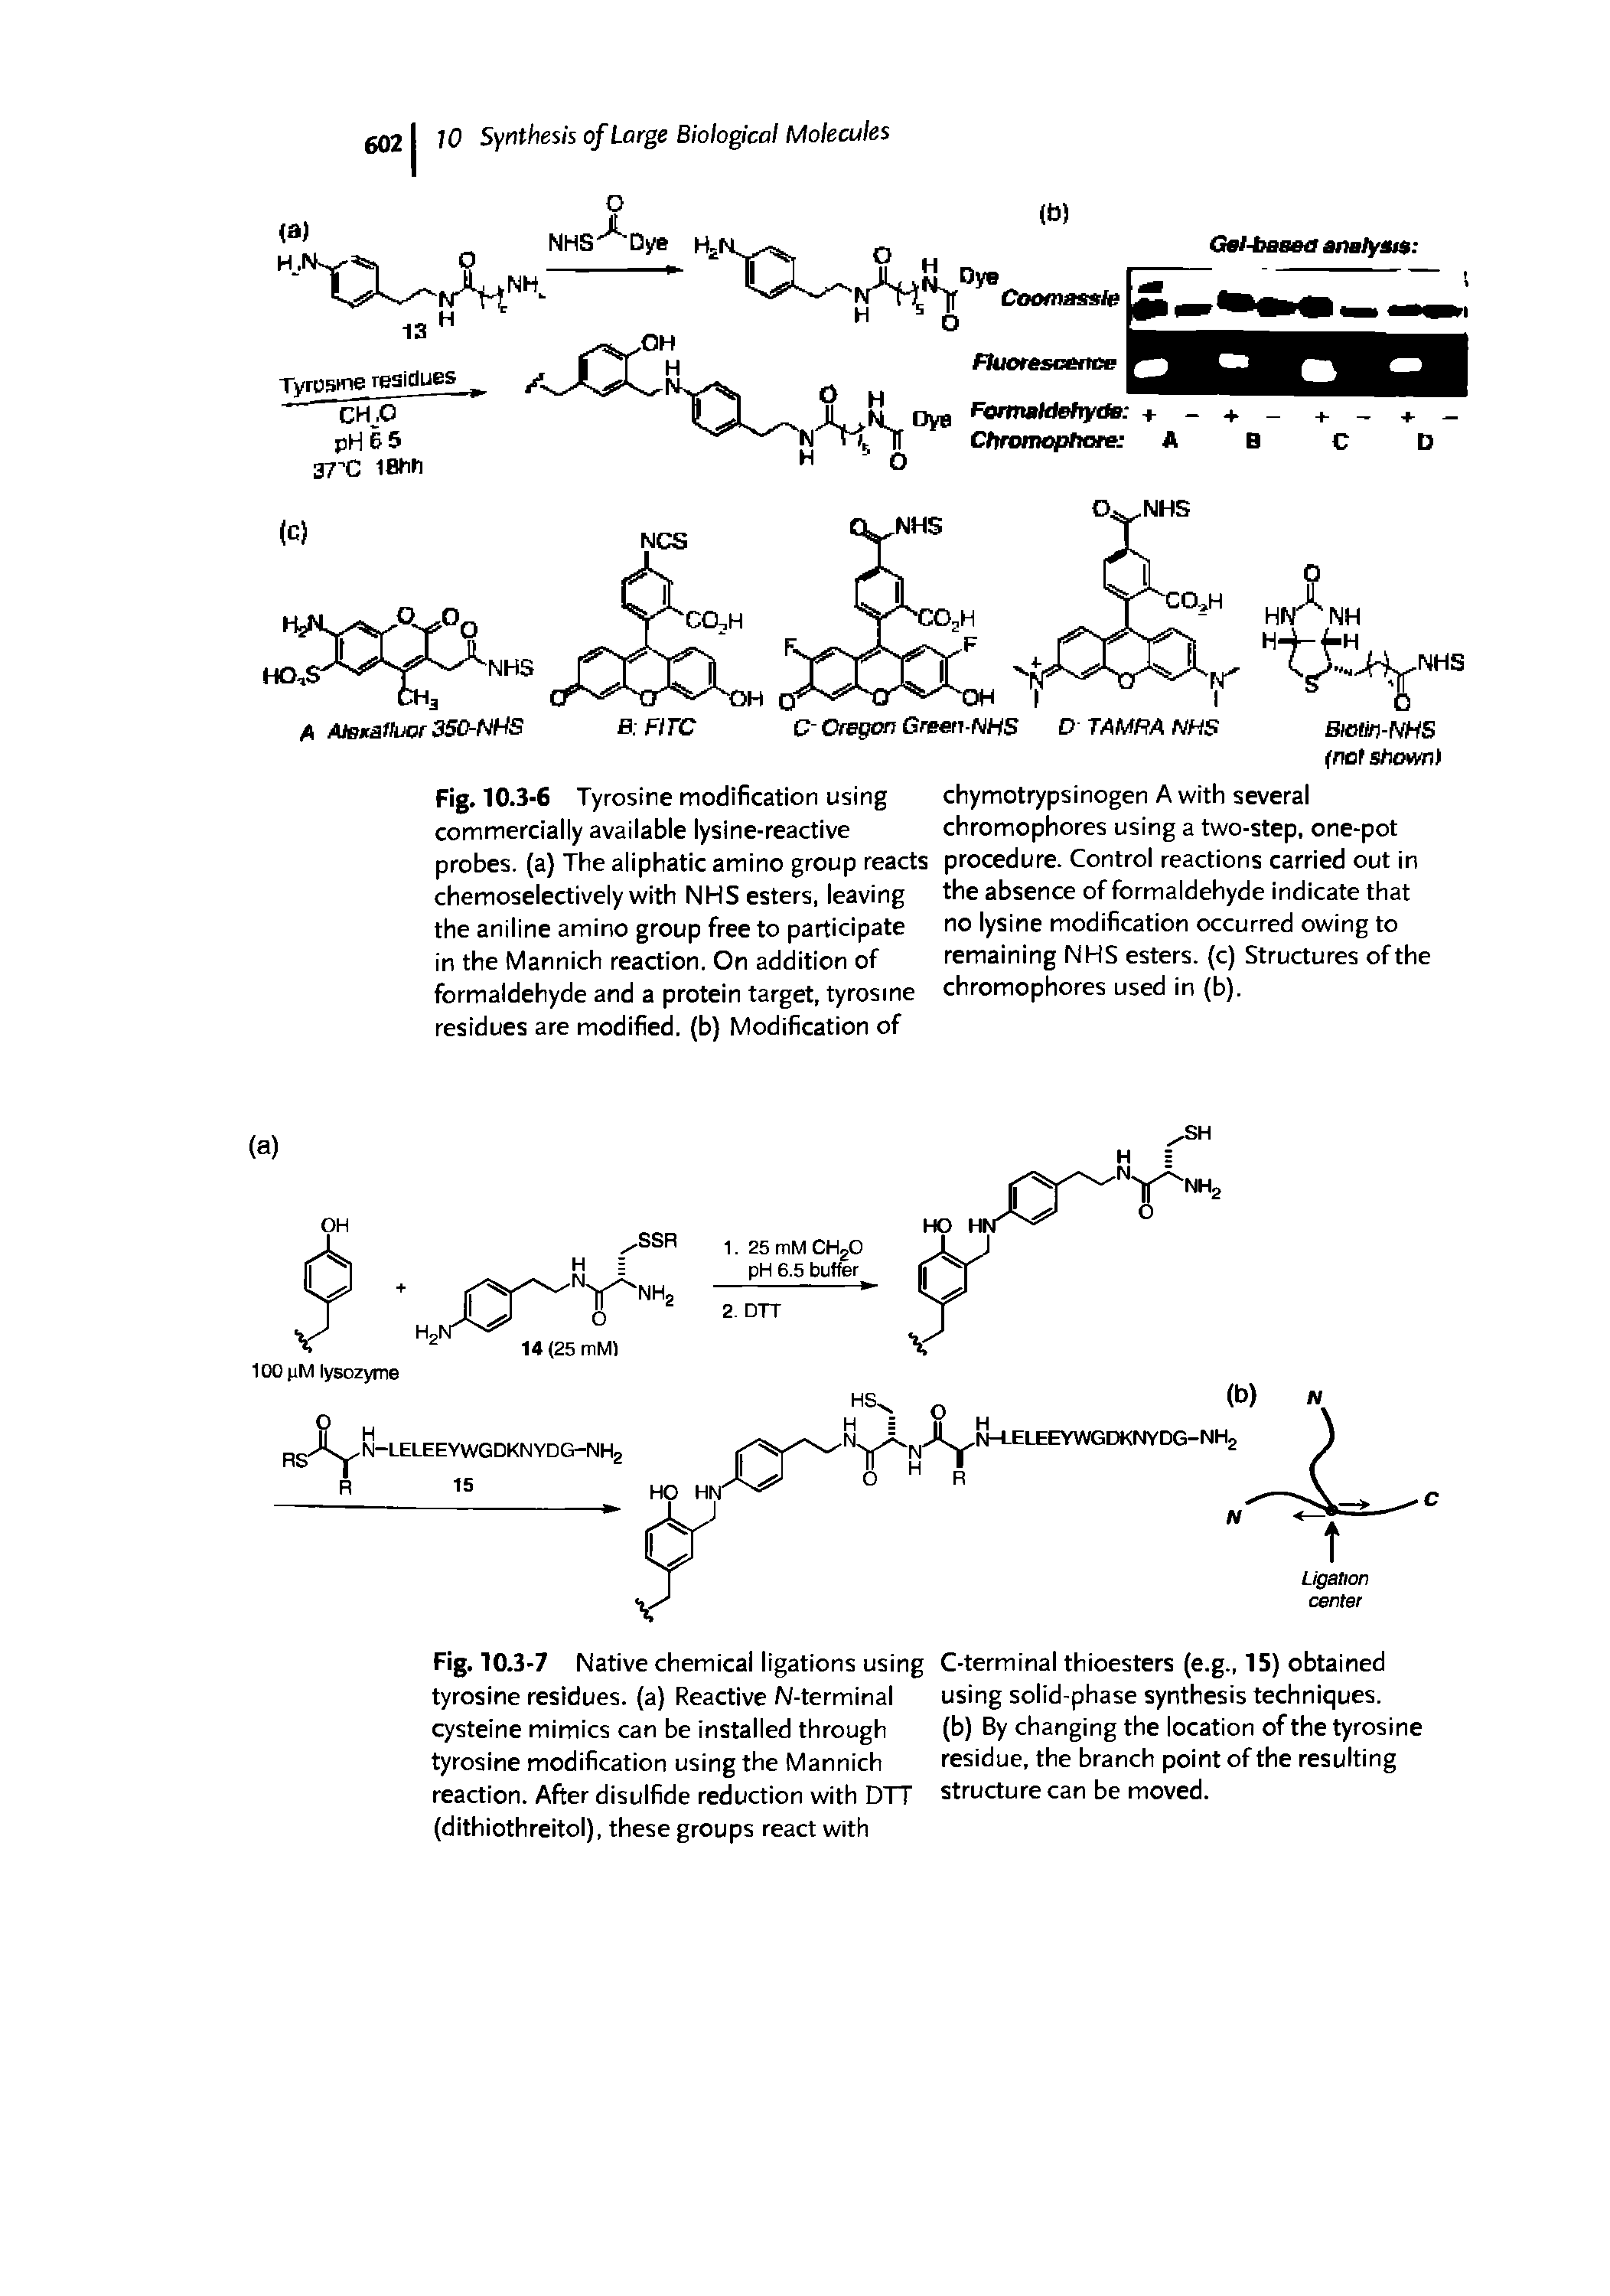 Fig. 10.3-7 Native chemical ligations using C-terminal thioesters (e.g., 15) obtained tyrosine residues, (a) Reactive N-terminal using solid-phase synthesis techniques, cysteine mimics can be installed through (b) By changing the location of the tyrosine...